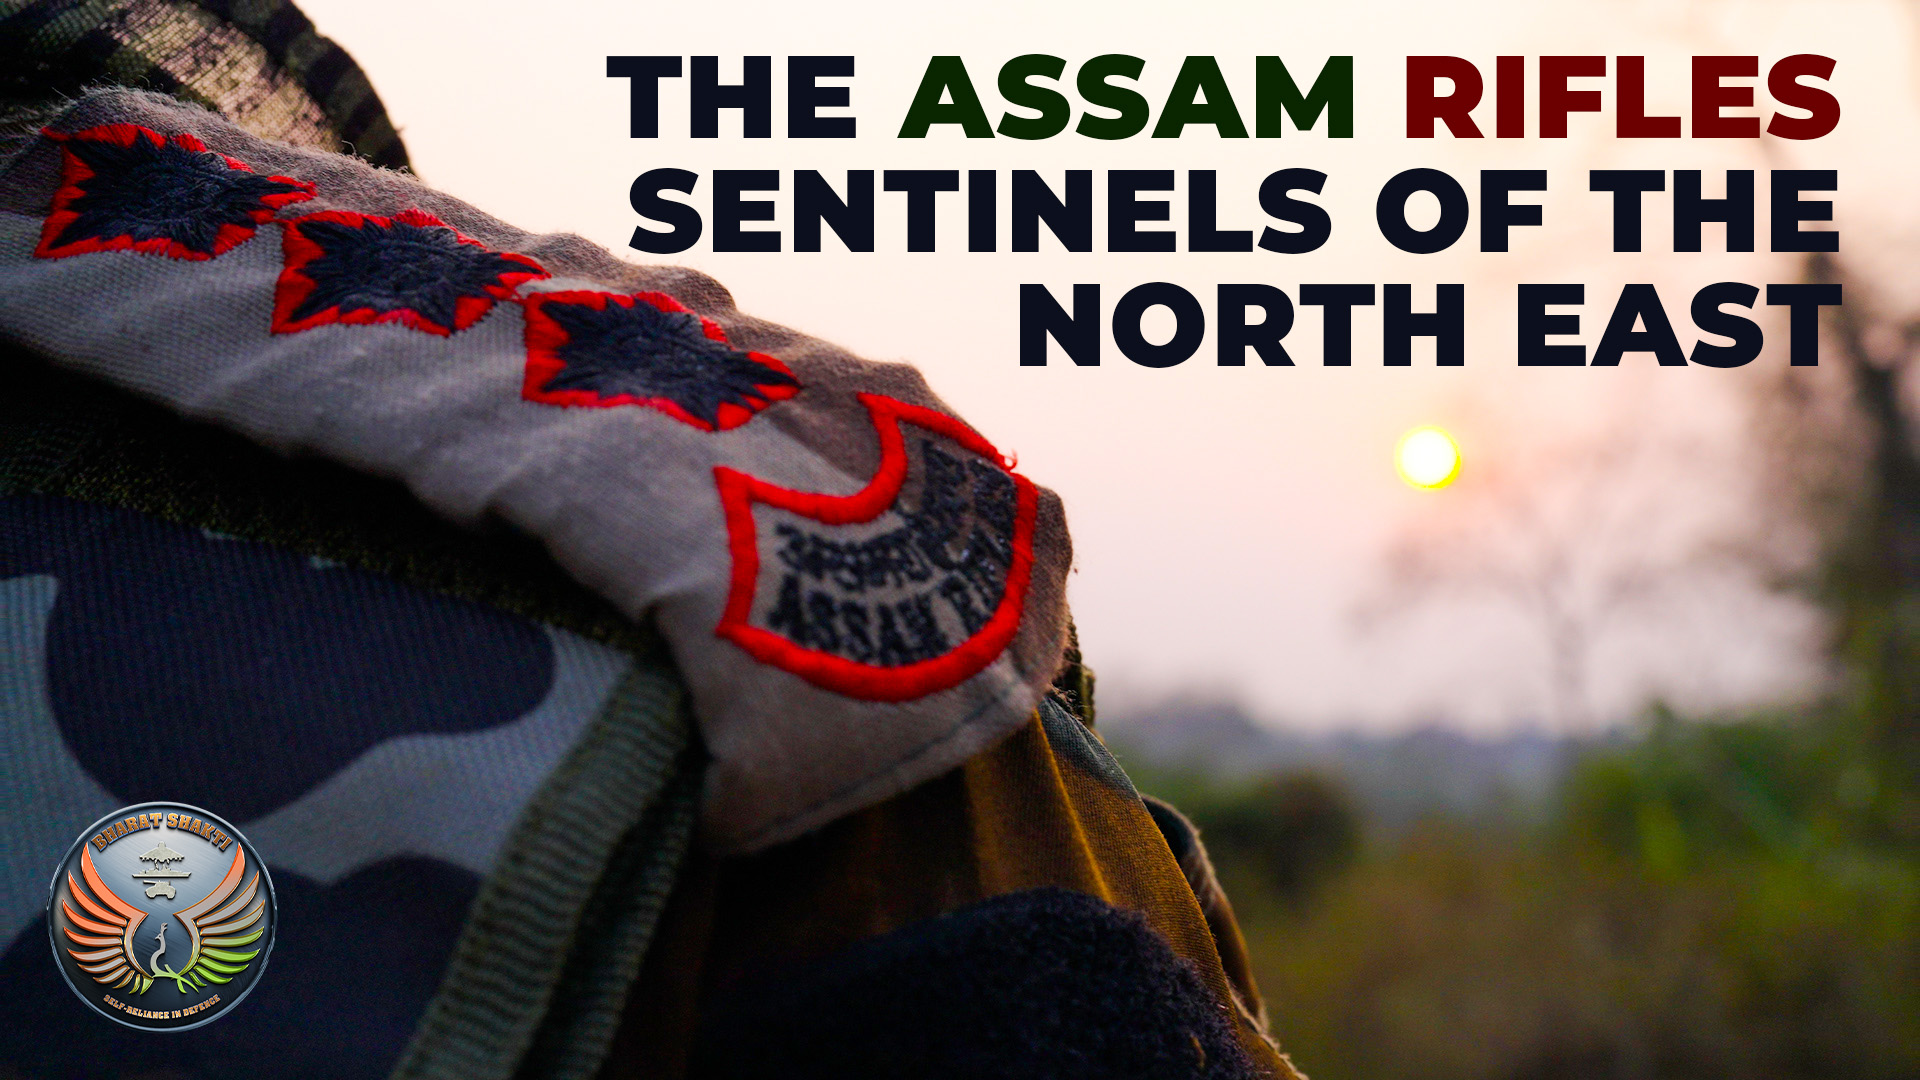 Assam Rifles Remains Significant, With Expanded Role On China Border, Besides Traditional Duties